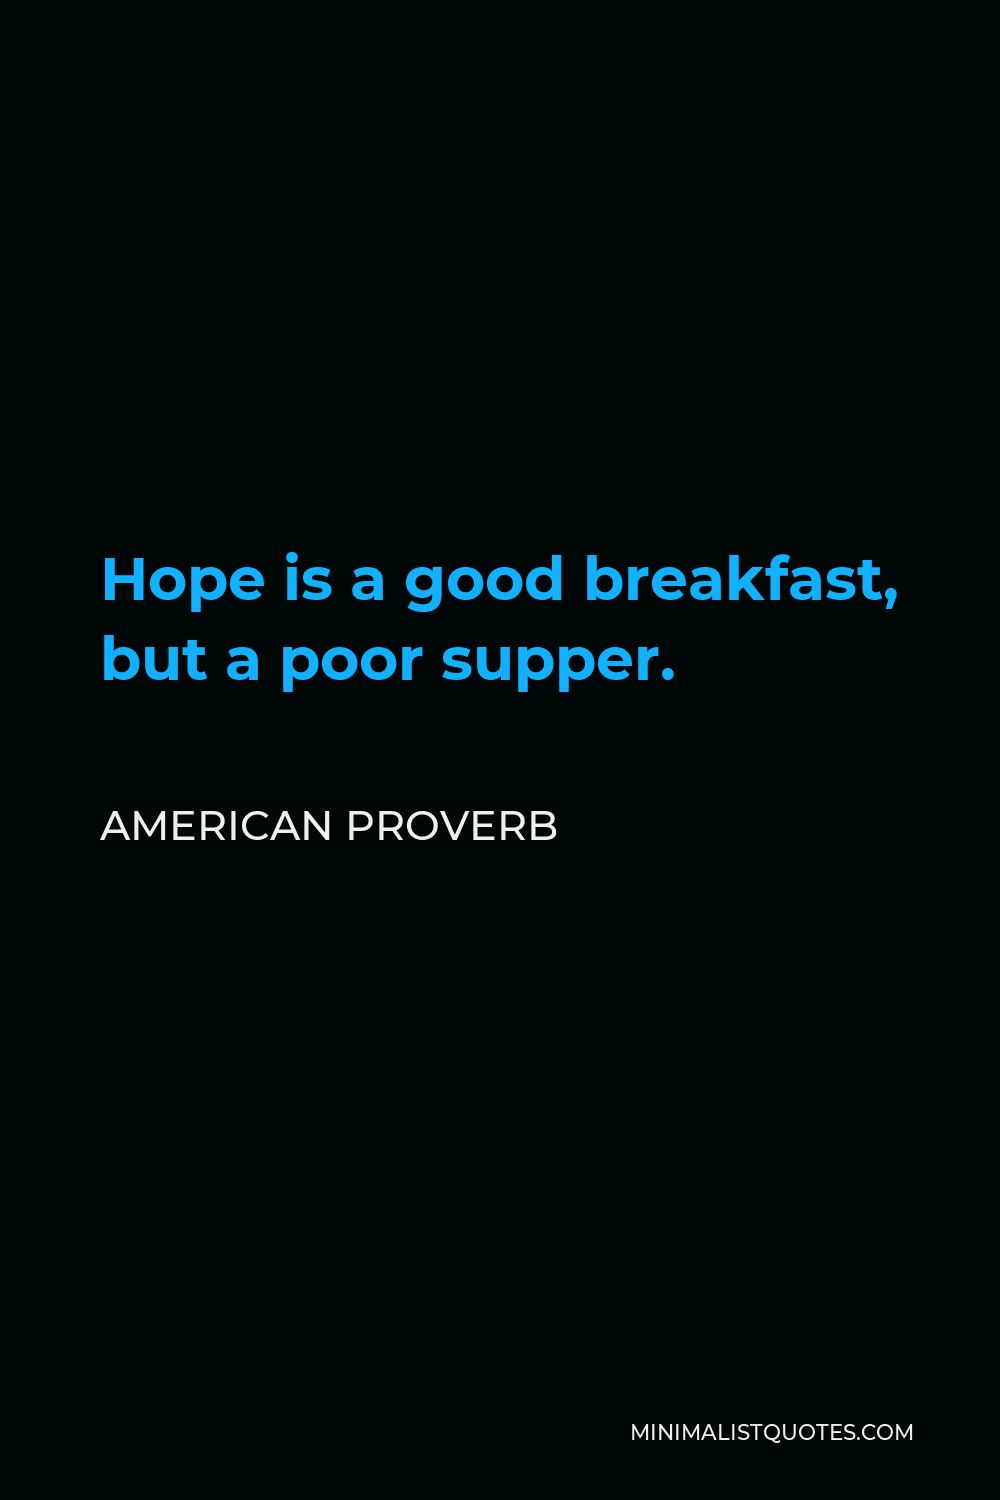 American Proverb Quote - Hope is a good breakfast, but a poor supper.